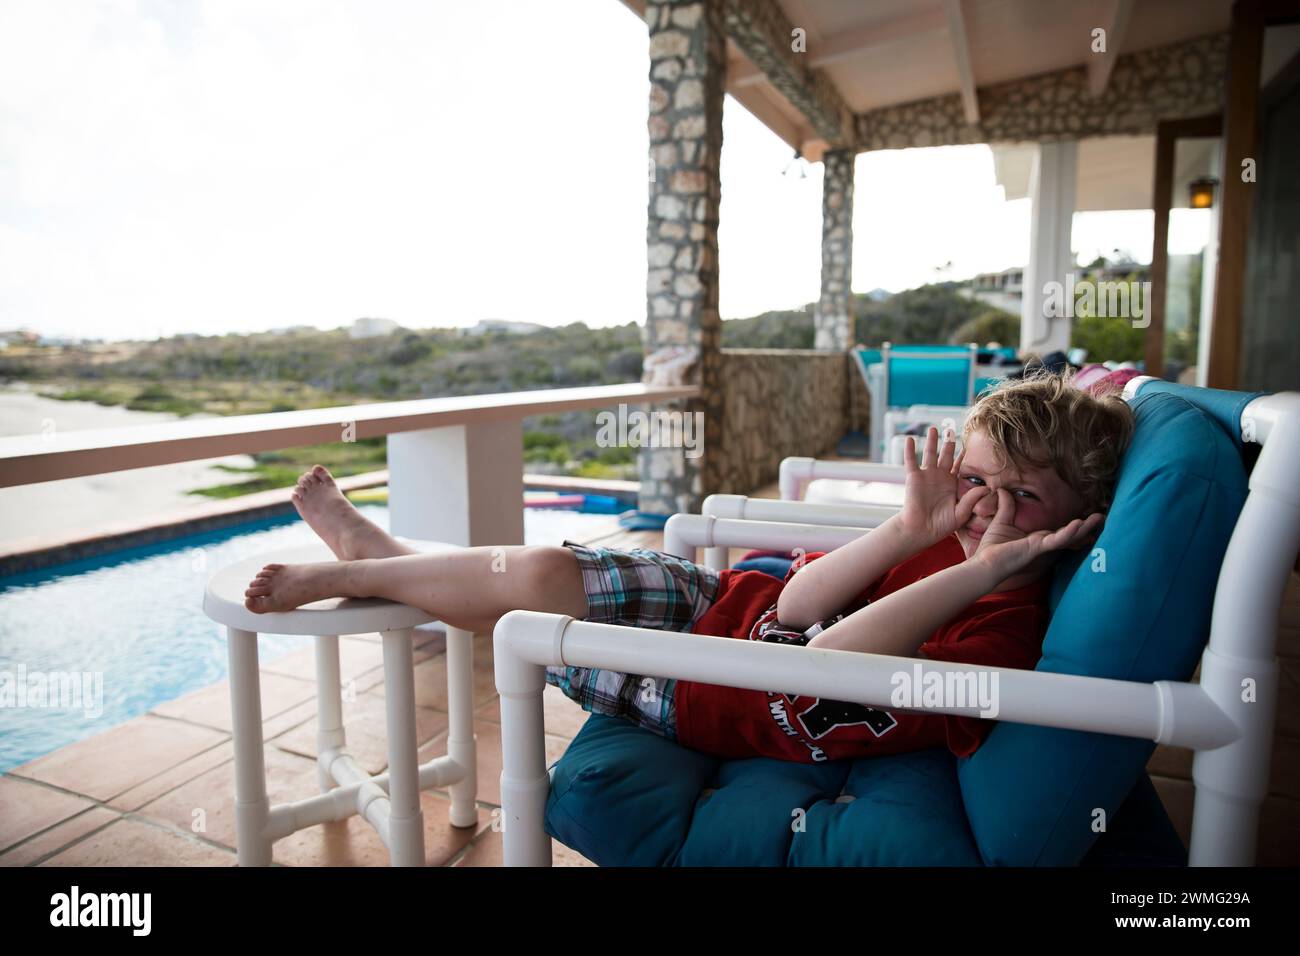 Young Boy Makes Faces at Camera, on Patio on Caribbean Vacation Stock Photo